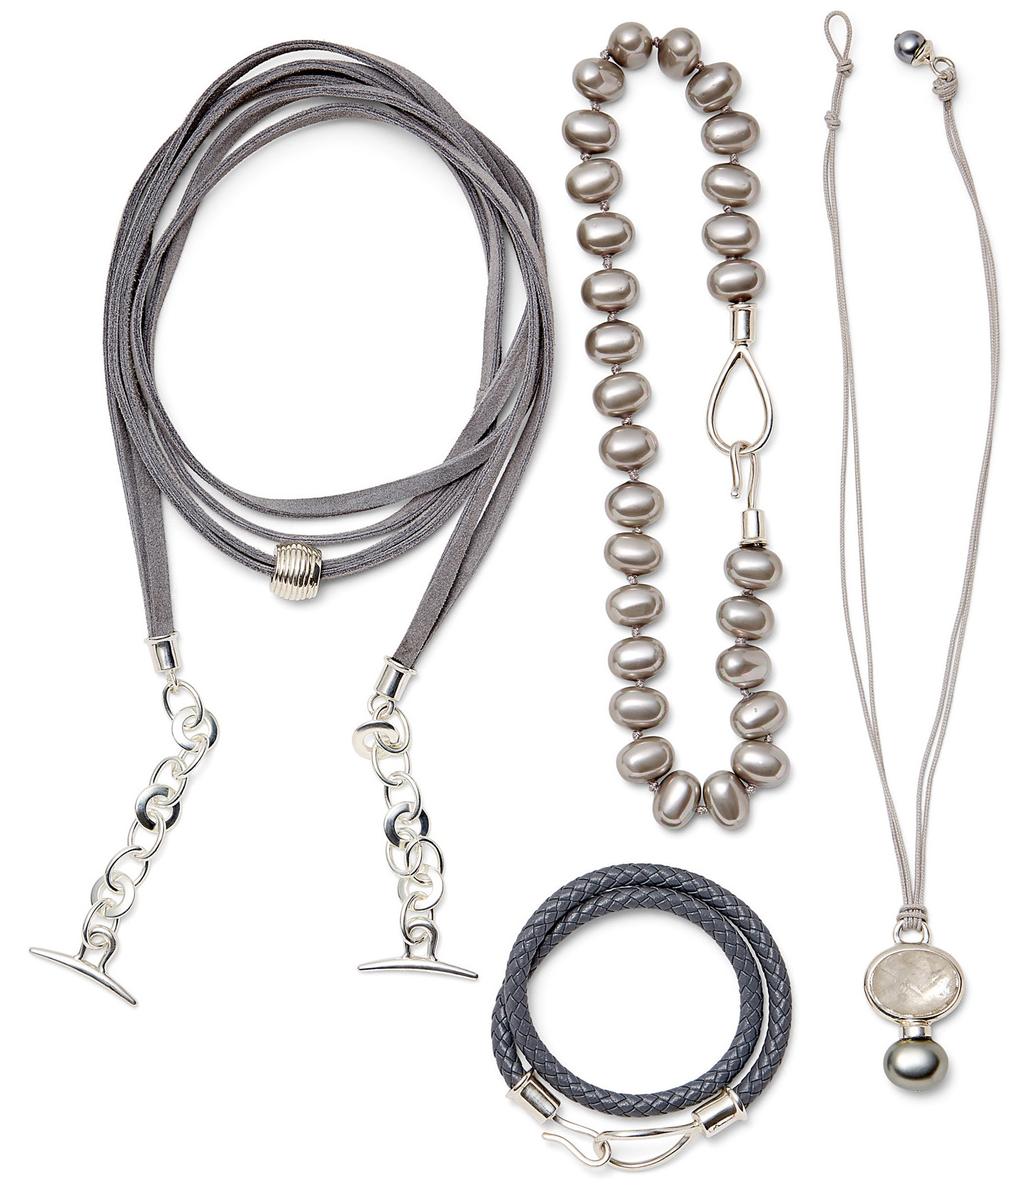 Classic Silver Holiday 07 Grey suede lariat with sliding sterling silver details NUBUCK-LARIAT-S/S Lasso and hook clasp necklace hand knotted with mini slate pebble pearls 7 LP-M Lasso hook braided